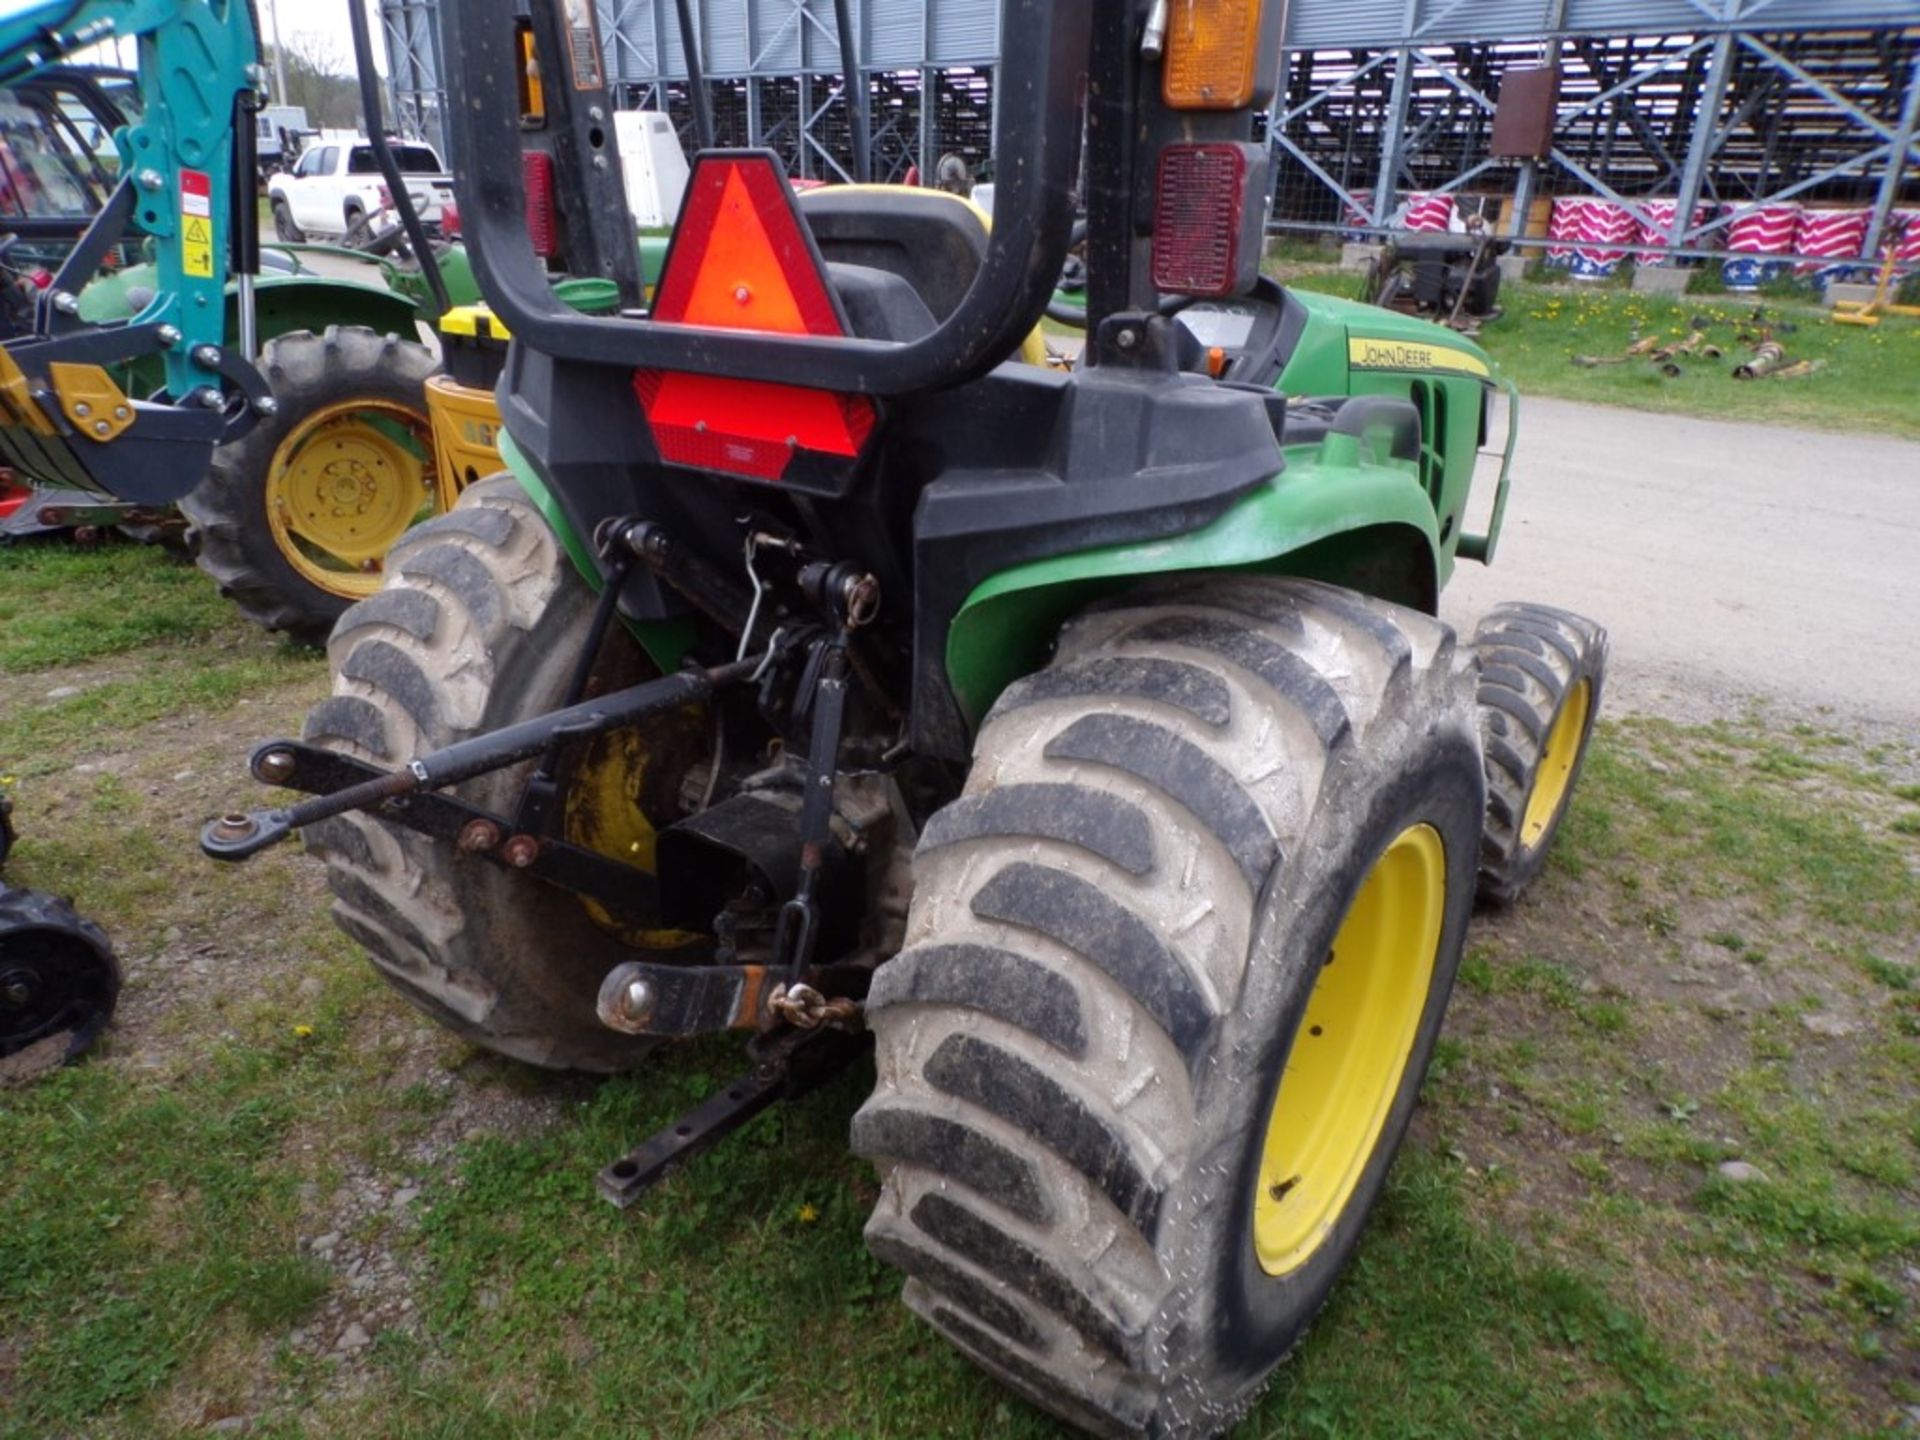 John Deere 3025E, 4 WD Compact, Dsl. Hydro, 3 PT PTO, 4730 Hours, ROPS (5414) - Image 4 of 4